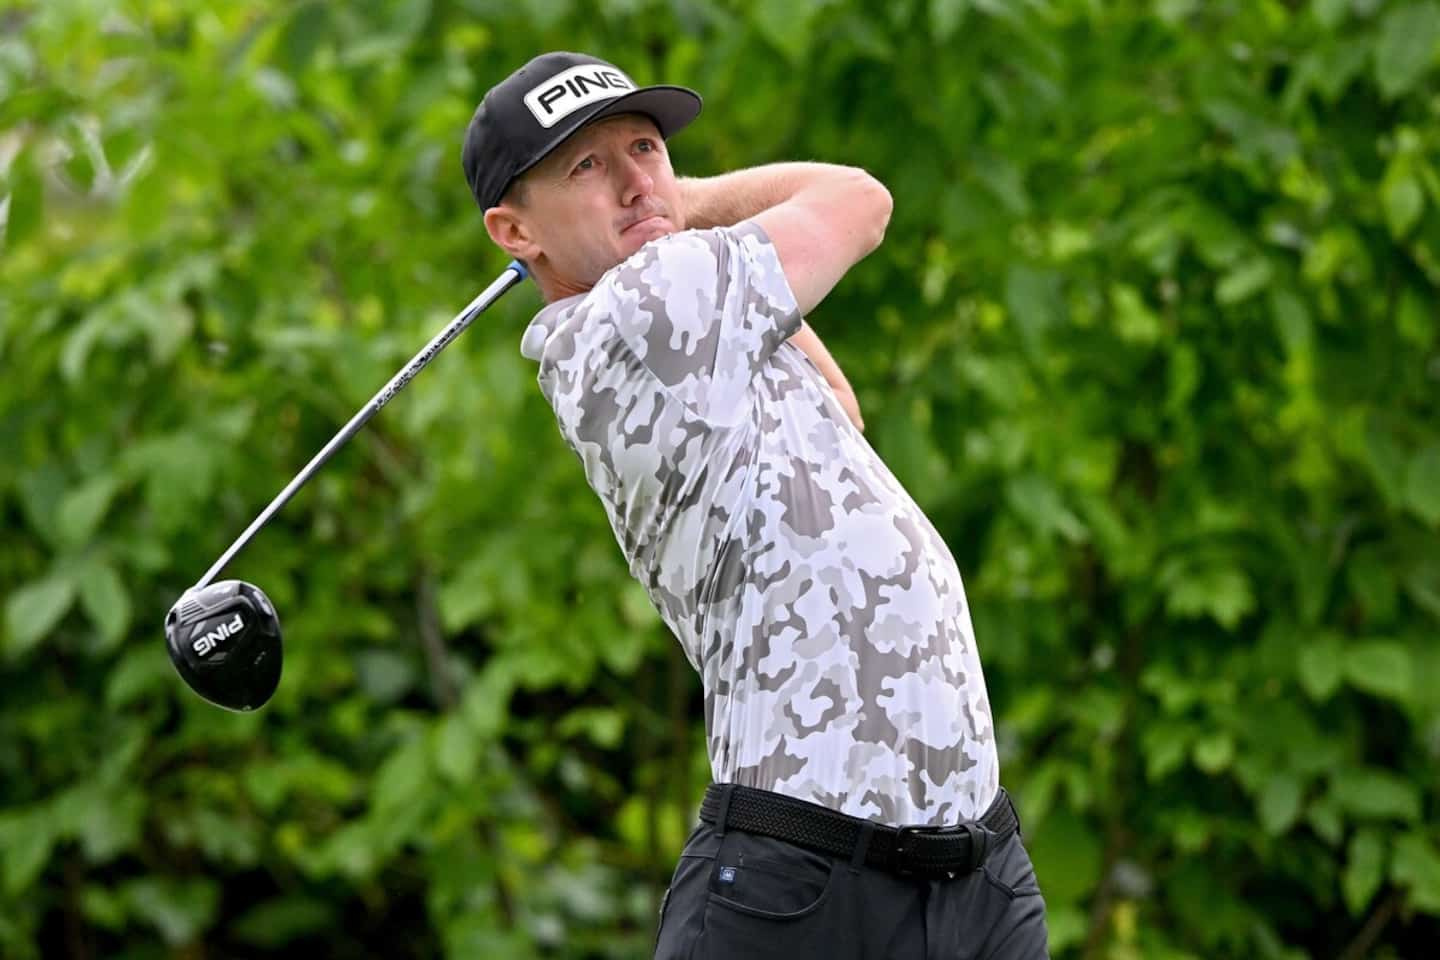 Good start for Mackenzie Hughes at the Canadian Open